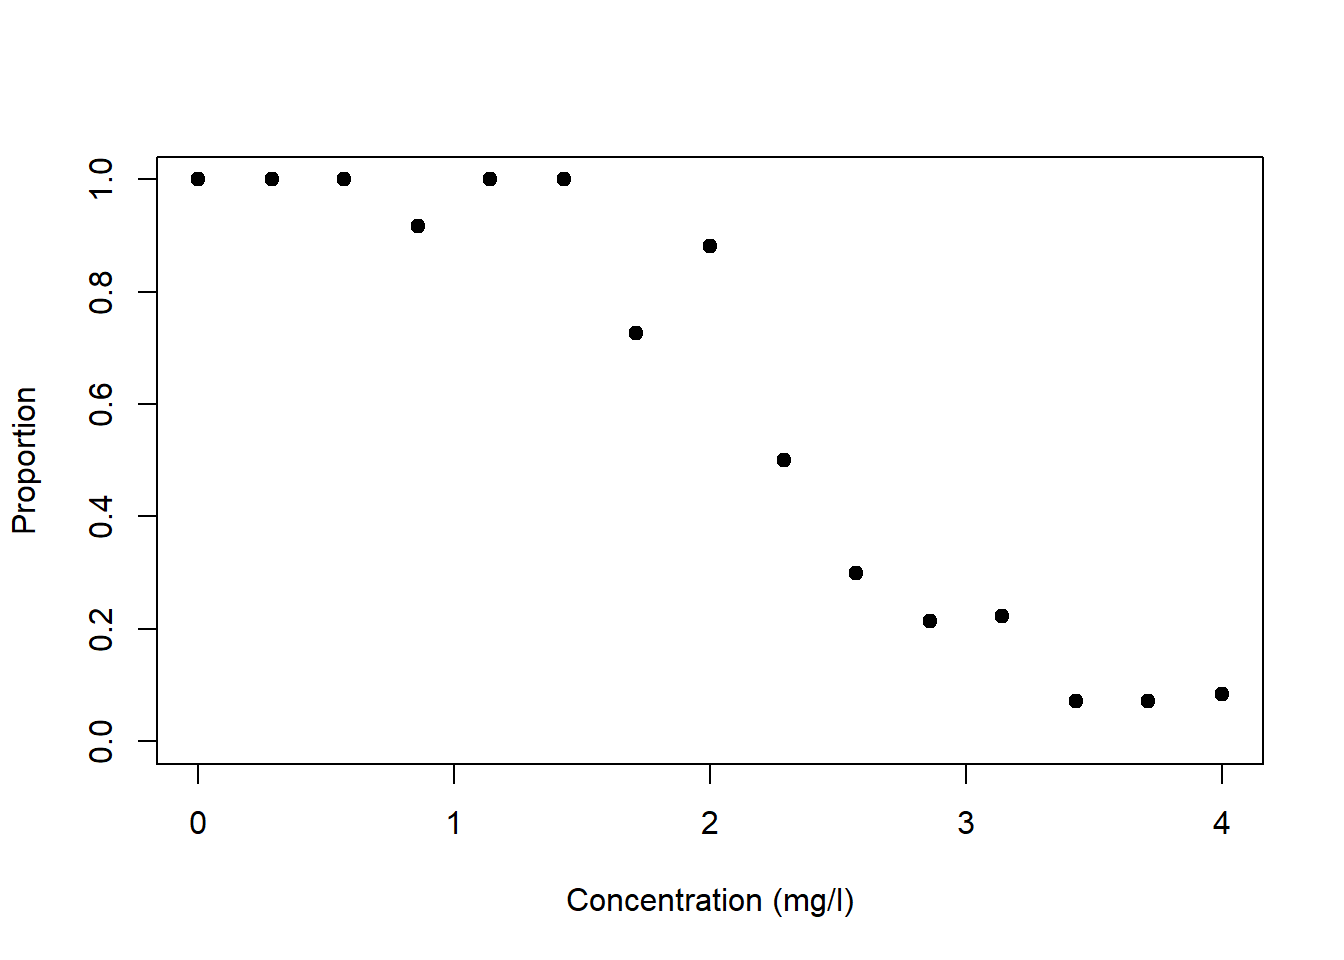 Left: Proportion of organisms surviving as a function of the concentration of a toxic substance. Data from: @dormann2013. Right: In this example the variance of $y$ peaks at the mean response of $y$.